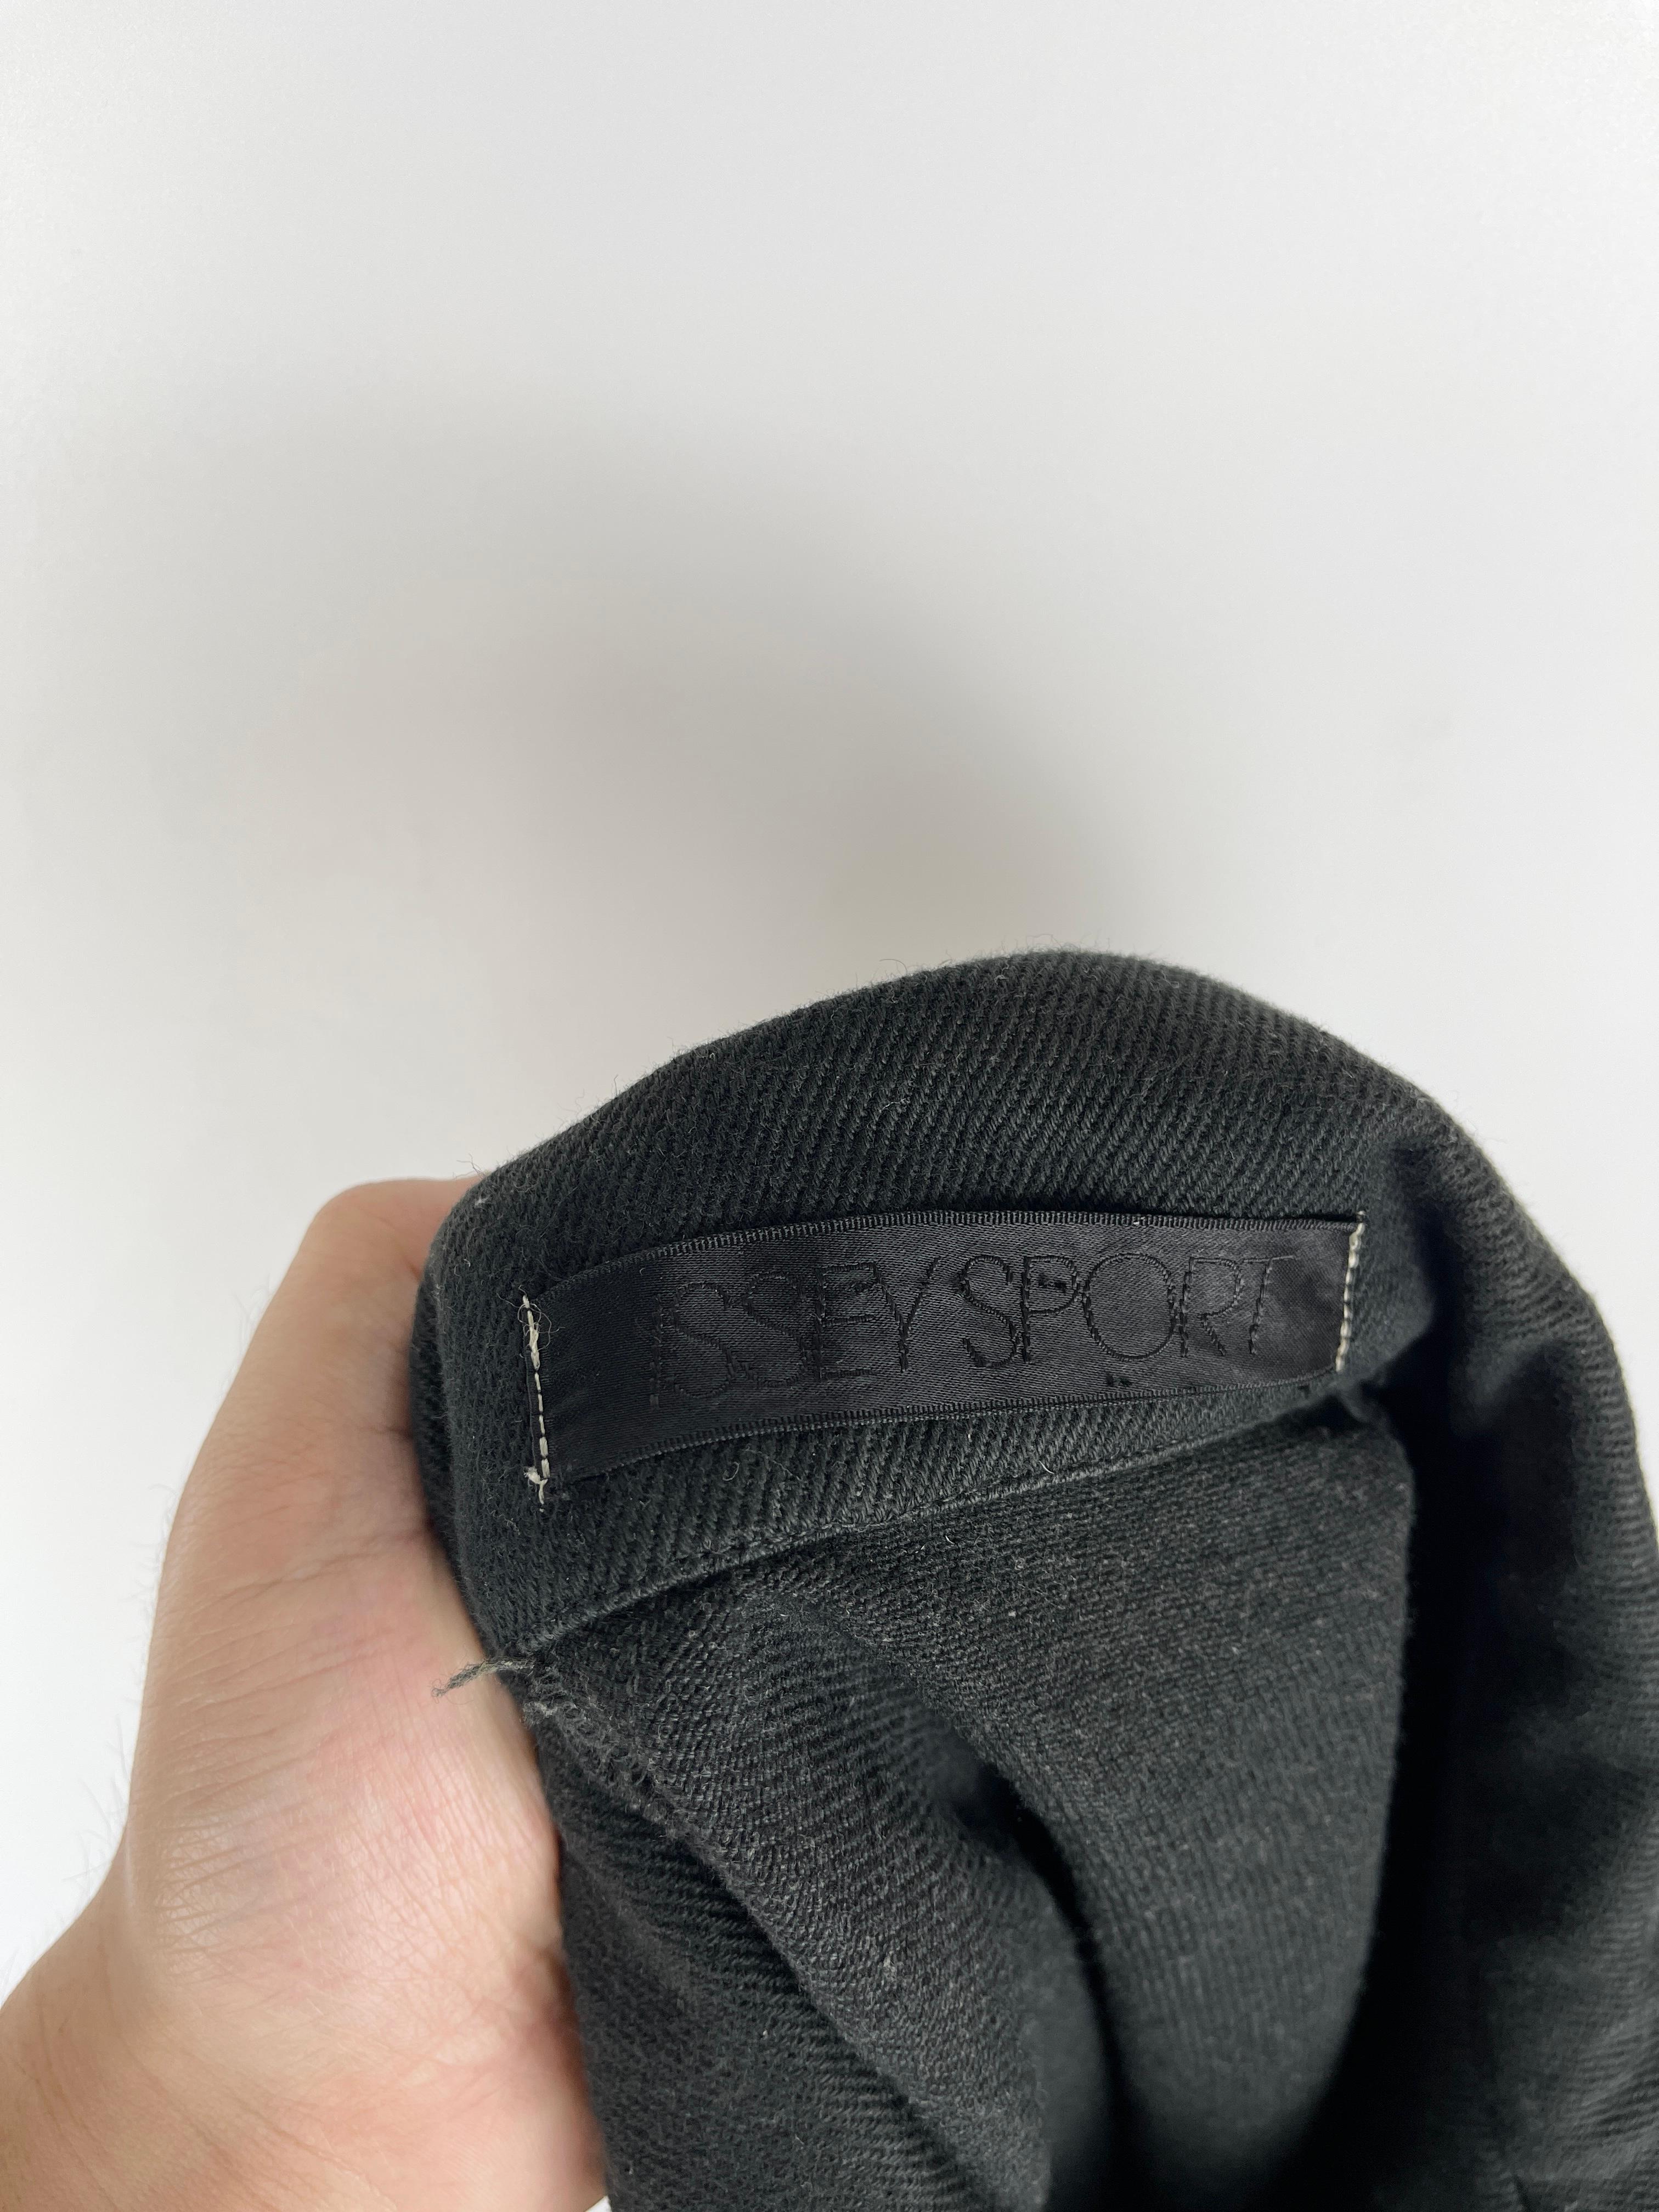 Vintage item from Issey Sport line by Tsumori Chisato. The piece was an alternative and modified version of the Double Breasted Peacoat.

Size: 9, equivalent to Medium men.

Condition: There are signs of usage overall for a 40 years old